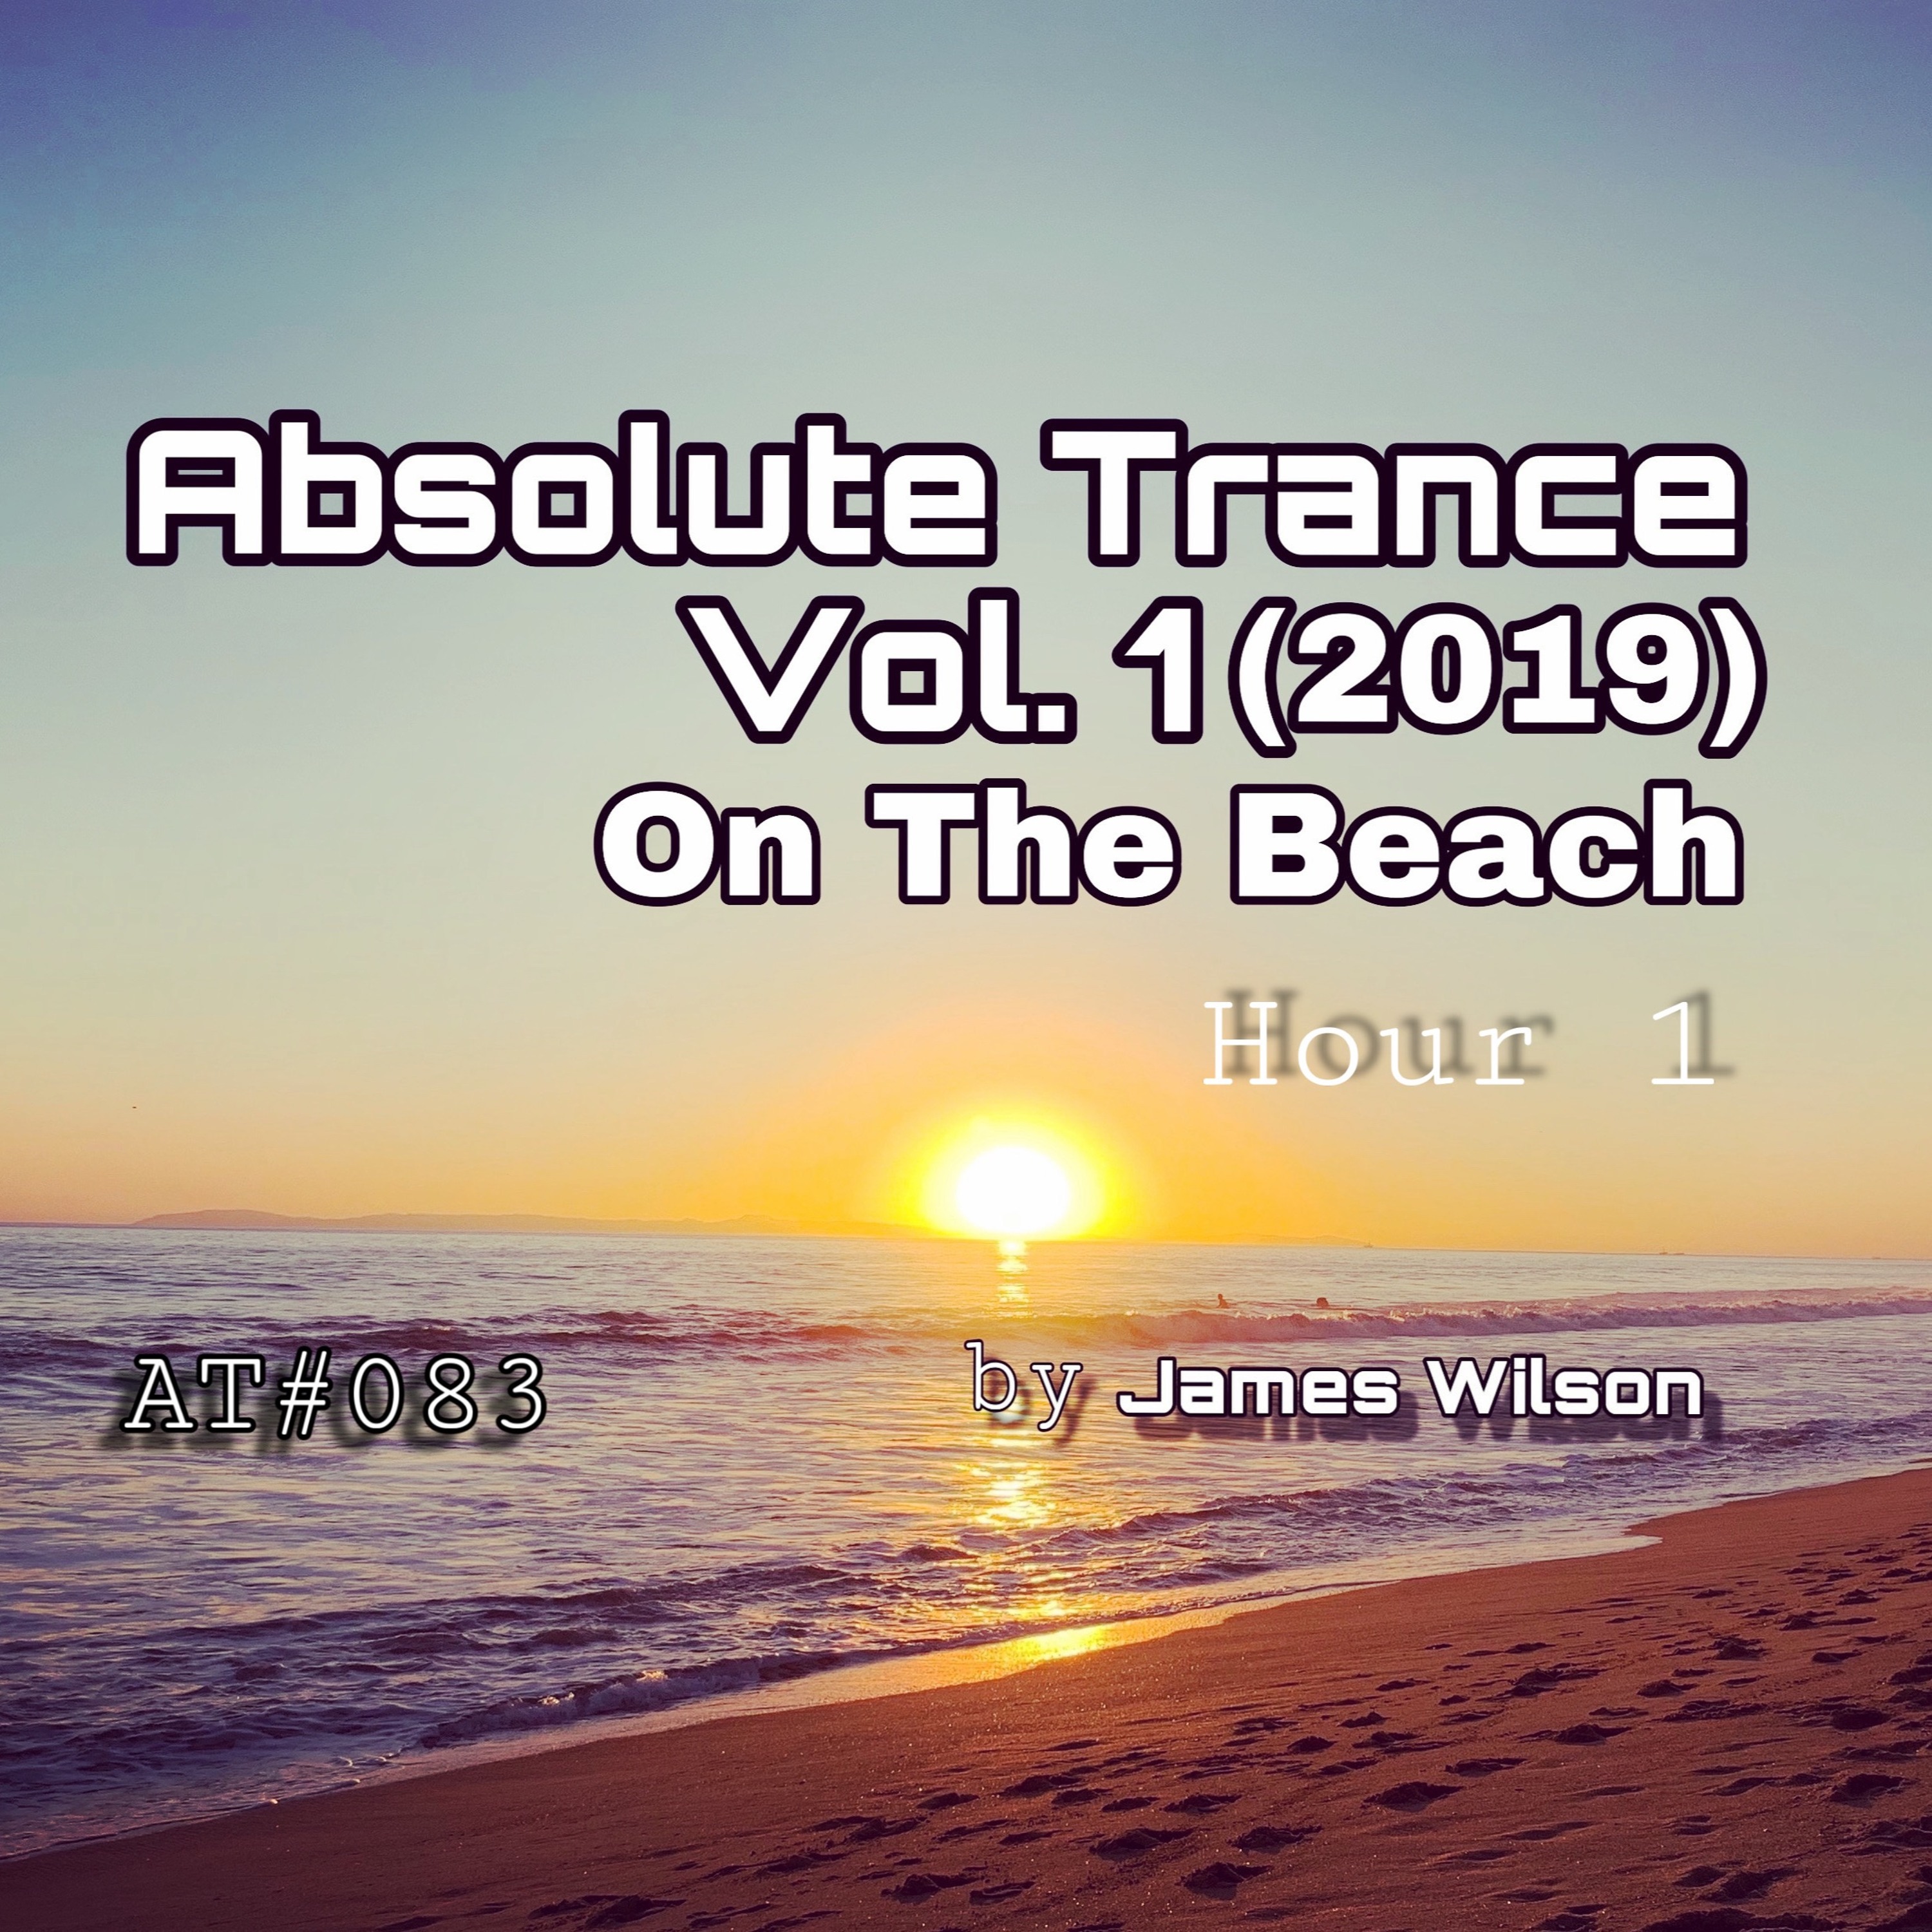 Absolute Trance Vol. 1 2019 On The Beach [Hour 1], AT#083